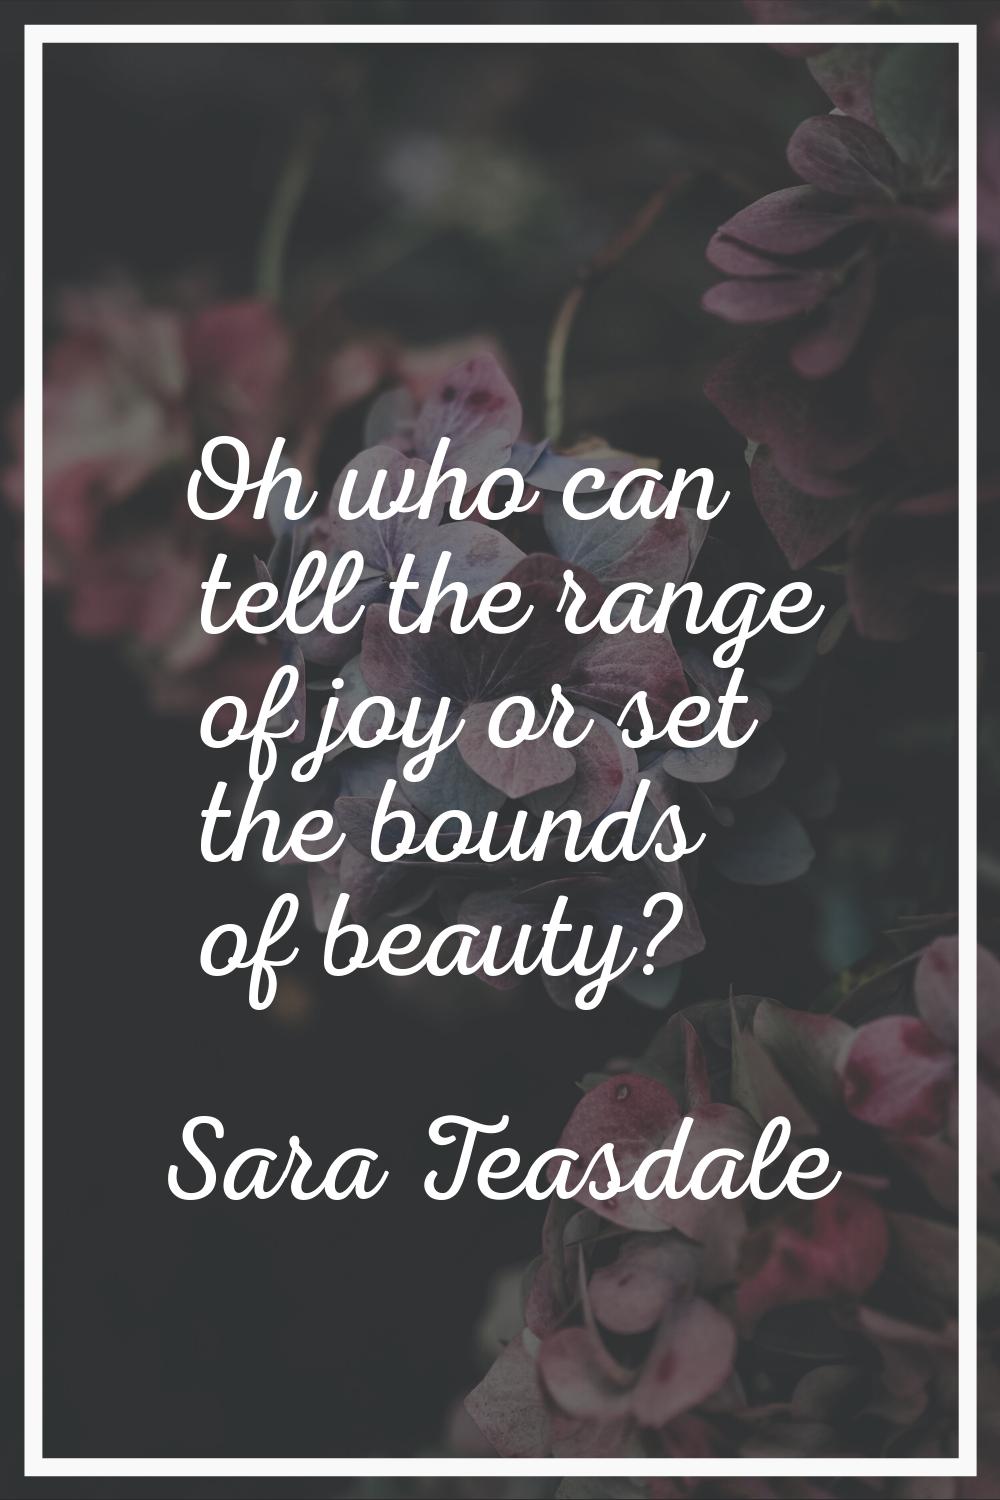 Oh who can tell the range of joy or set the bounds of beauty?